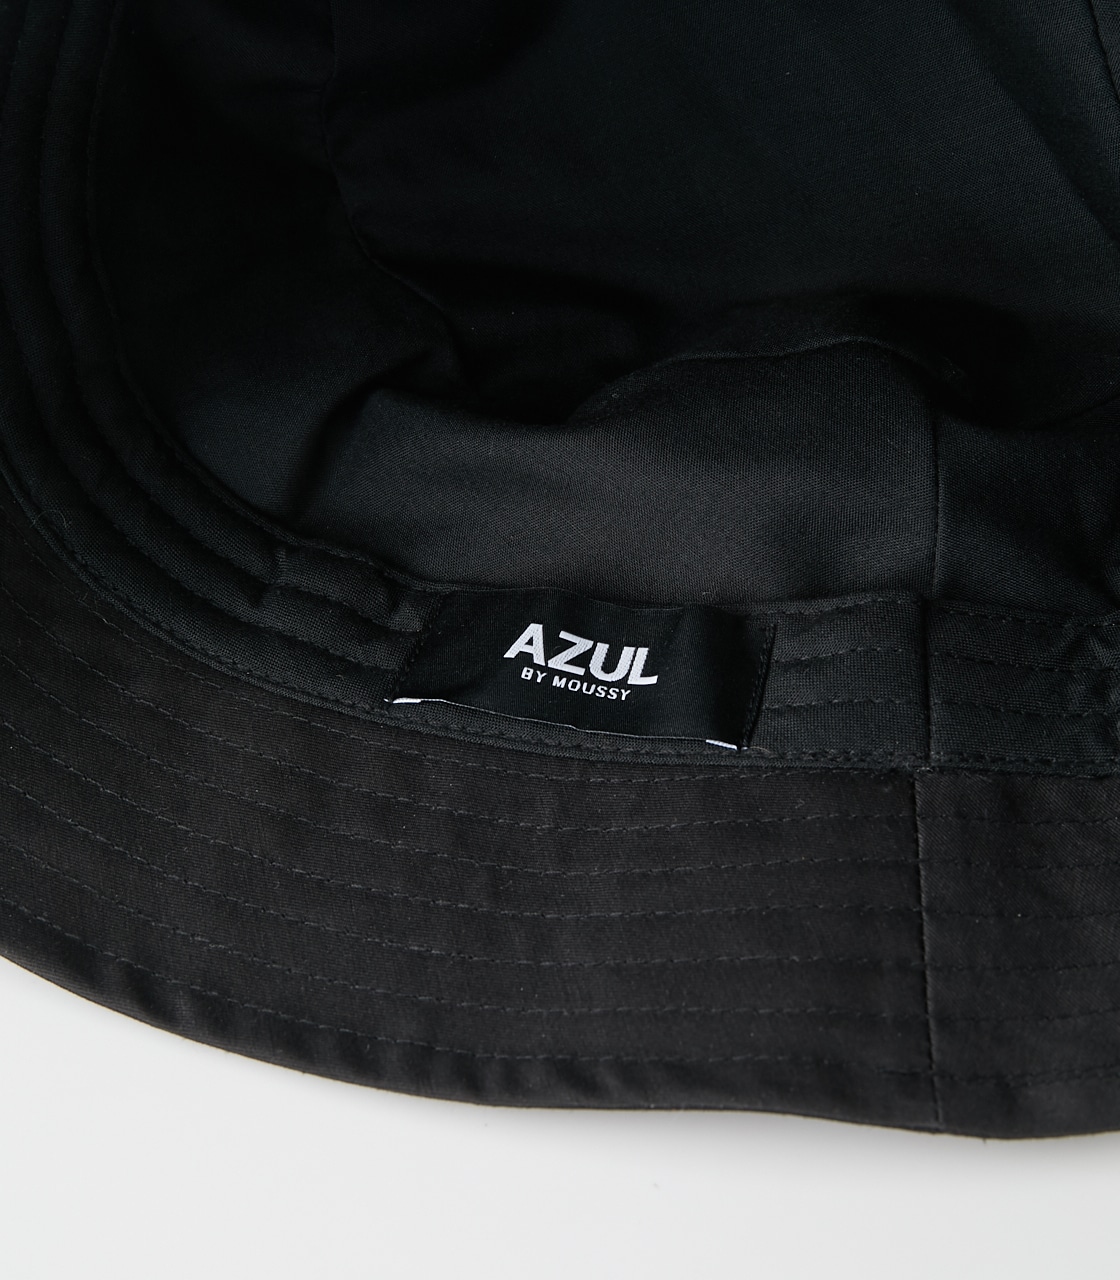 COMPACT DEEPLY BUCKET HAT/コンパクトディープリーバケットハット 詳細画像 BLK 6